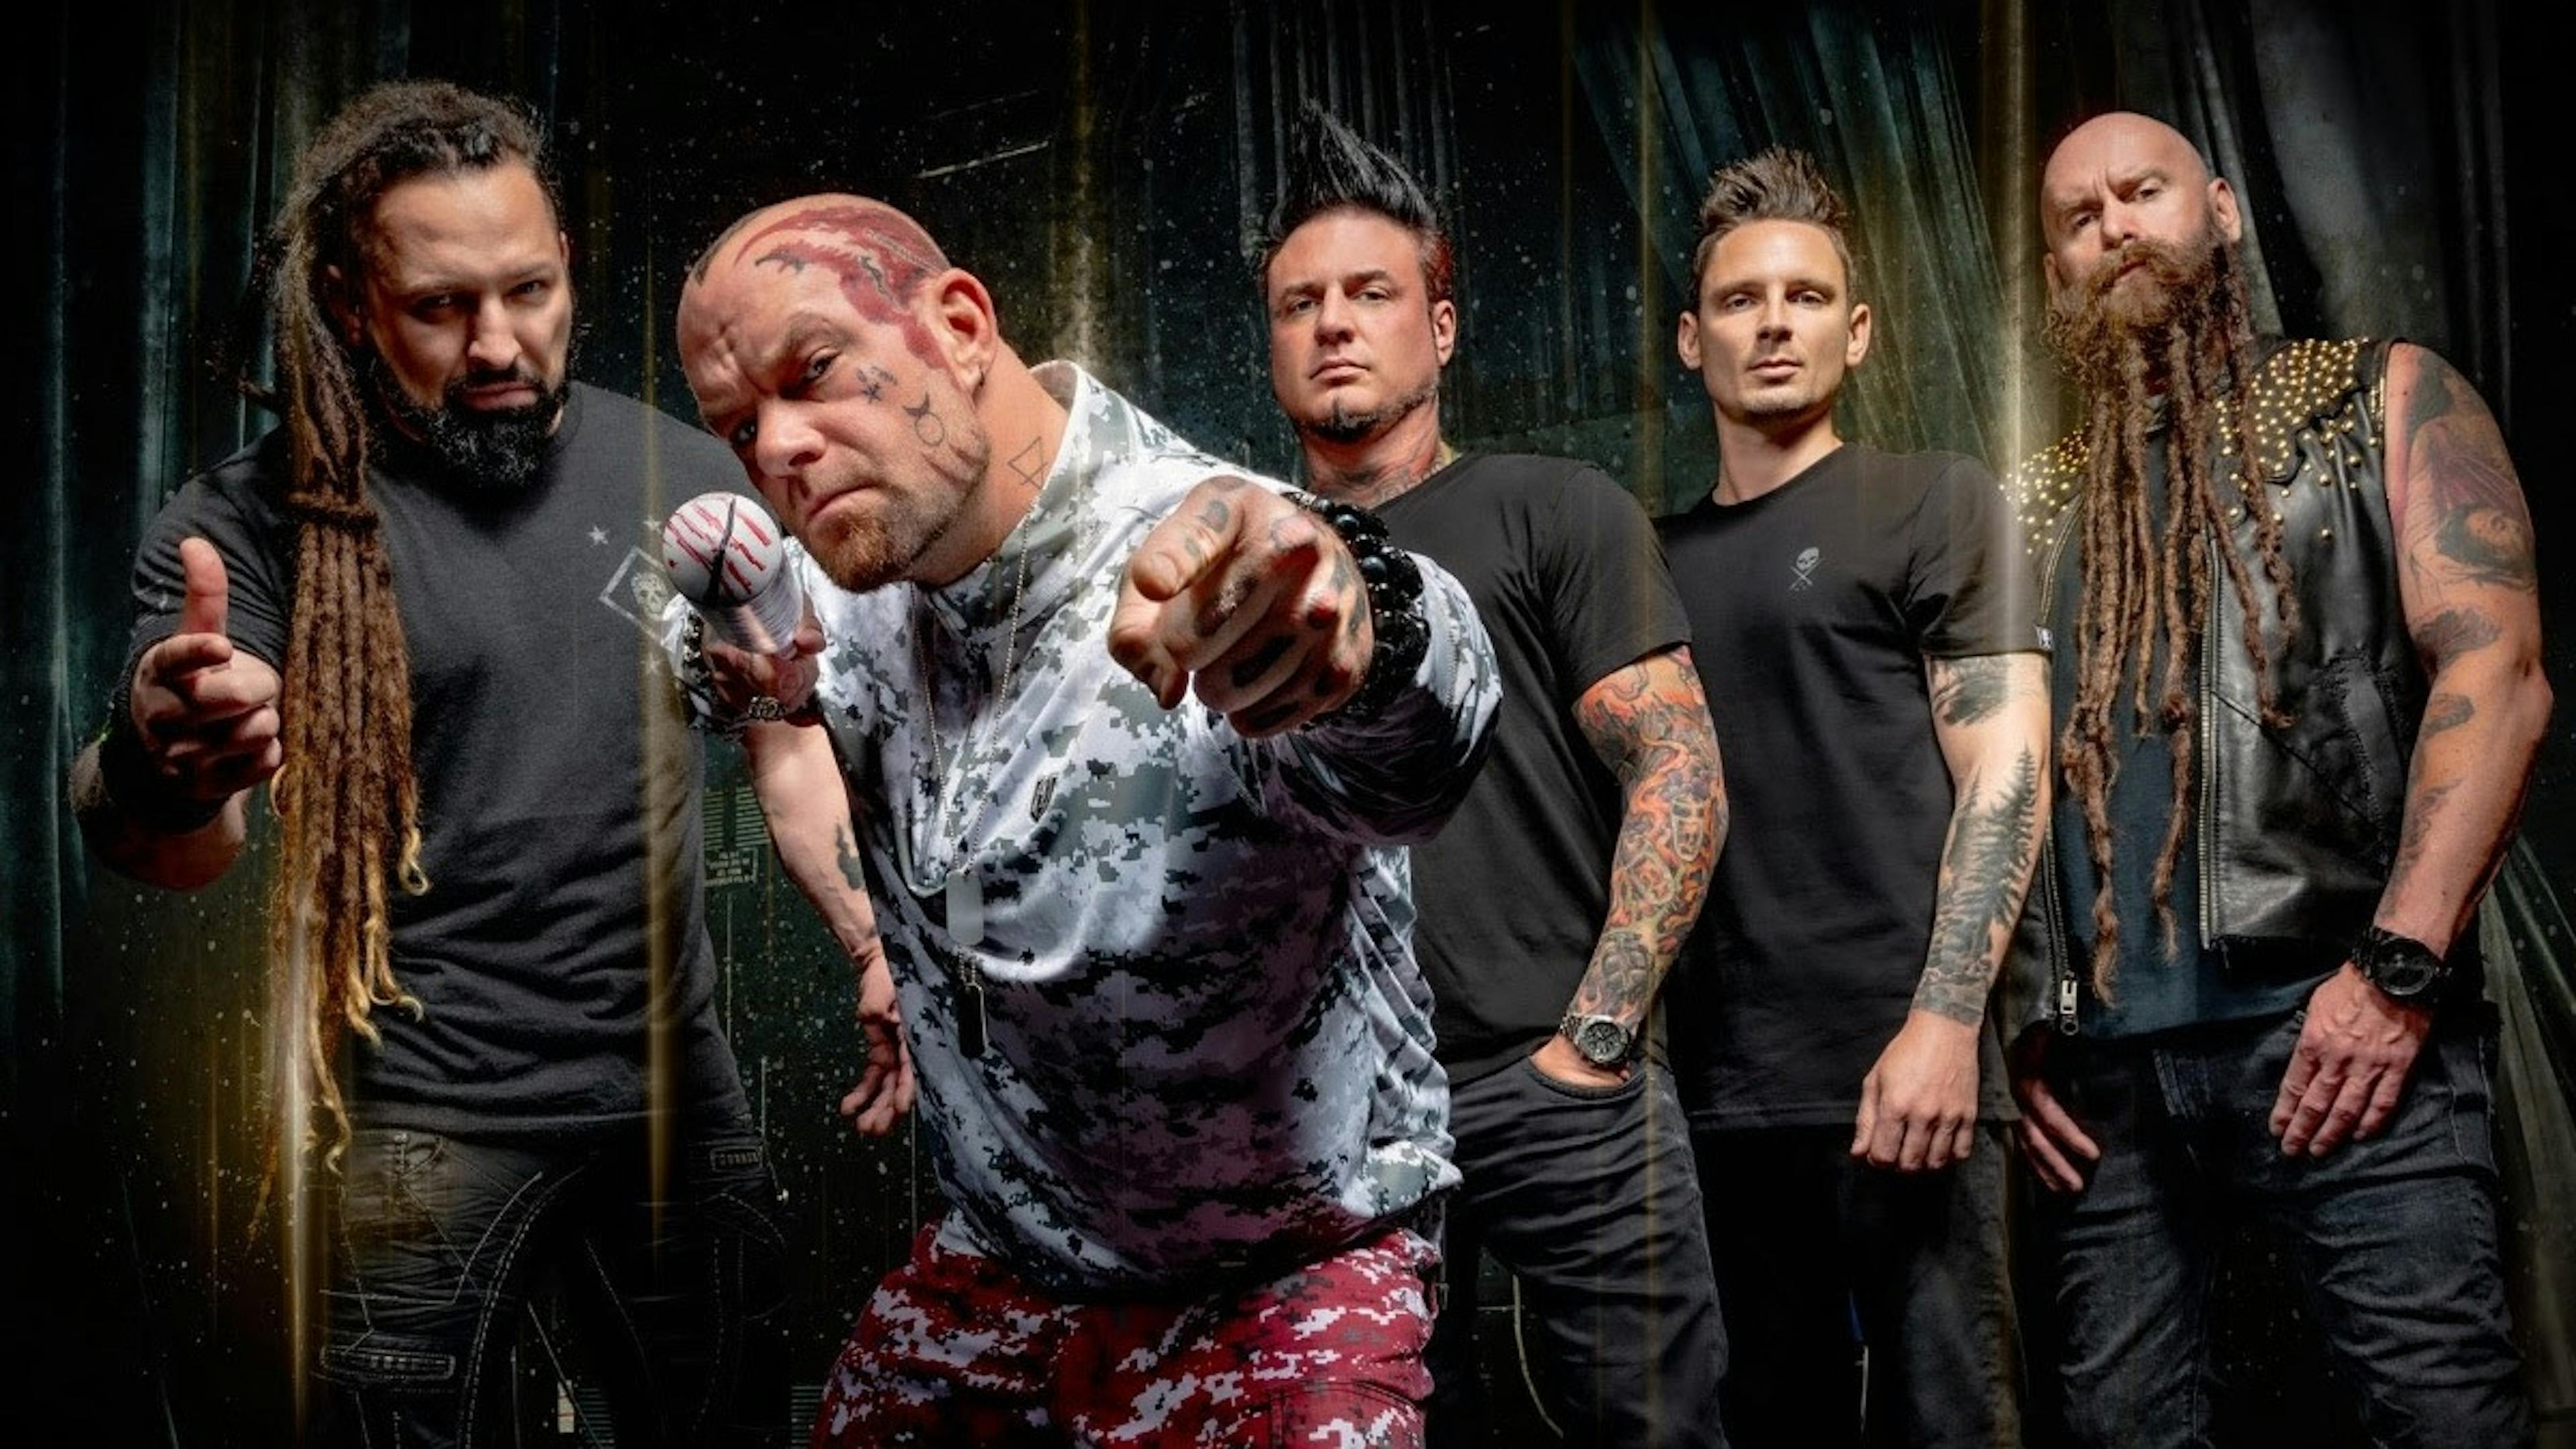 Five Finger Death Punch Have Announced A Tour With Papa Roach, I Prevail And Ice Nine Kills